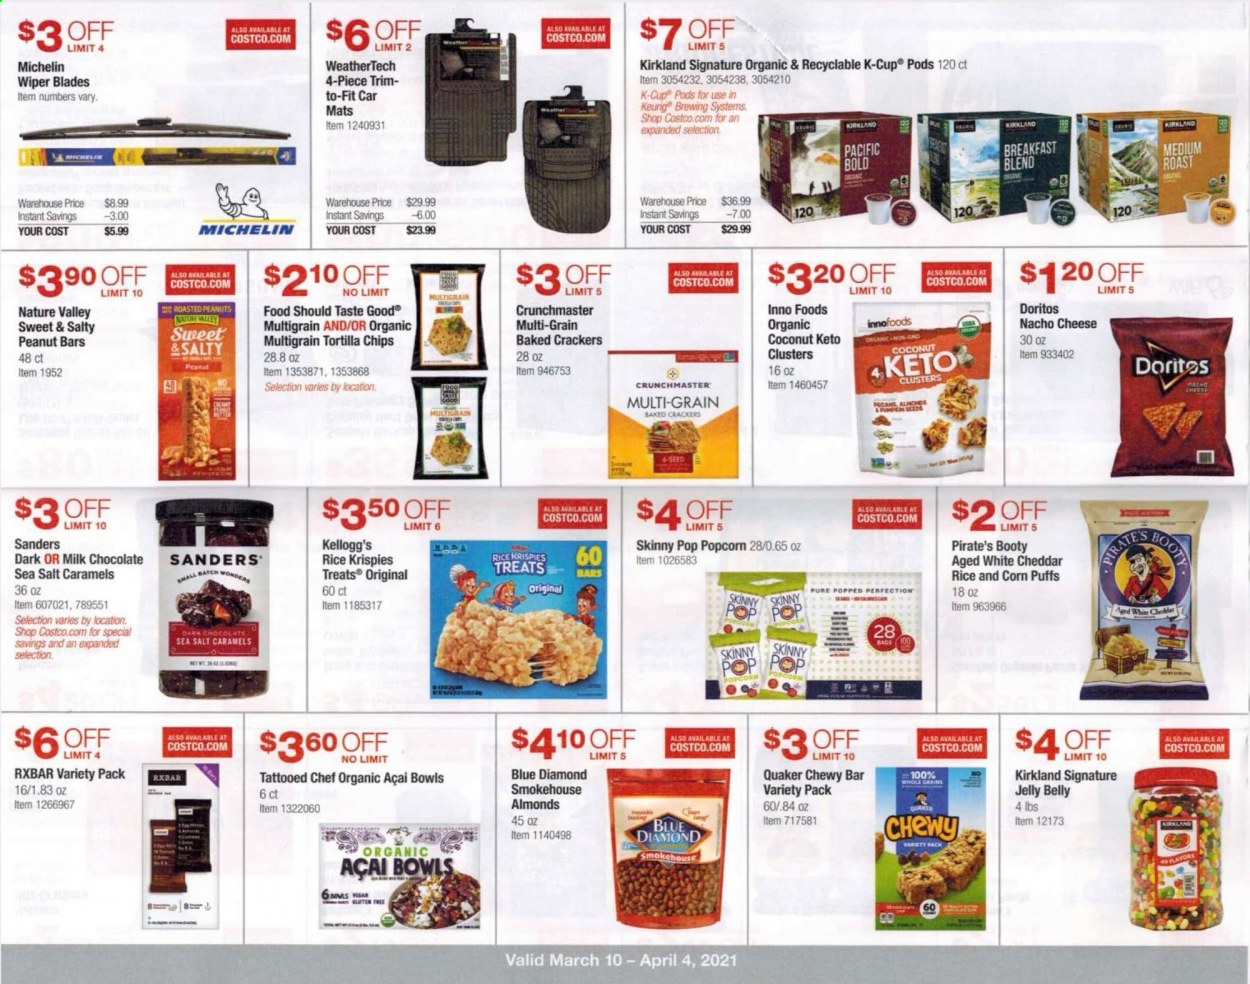 thumbnail - Costco Flyer - 03/10/2021 - 04/04/2021 - Sales products - puffs, coconut, Quaker, cheddar, cheese, jelly, milk chocolate, chocolate, crackers, Kellogg's, dark chocolate, Doritos, tortilla chips, chips, popcorn, Skinny Pop, Rice Krispies, Nature Valley, almonds, roasted peanuts, peanuts, Blue Diamond, coffee capsules, K-Cups, Keurig, breakfast blend, bag, plant seeds, wiper blades, Michelin. Page 8.